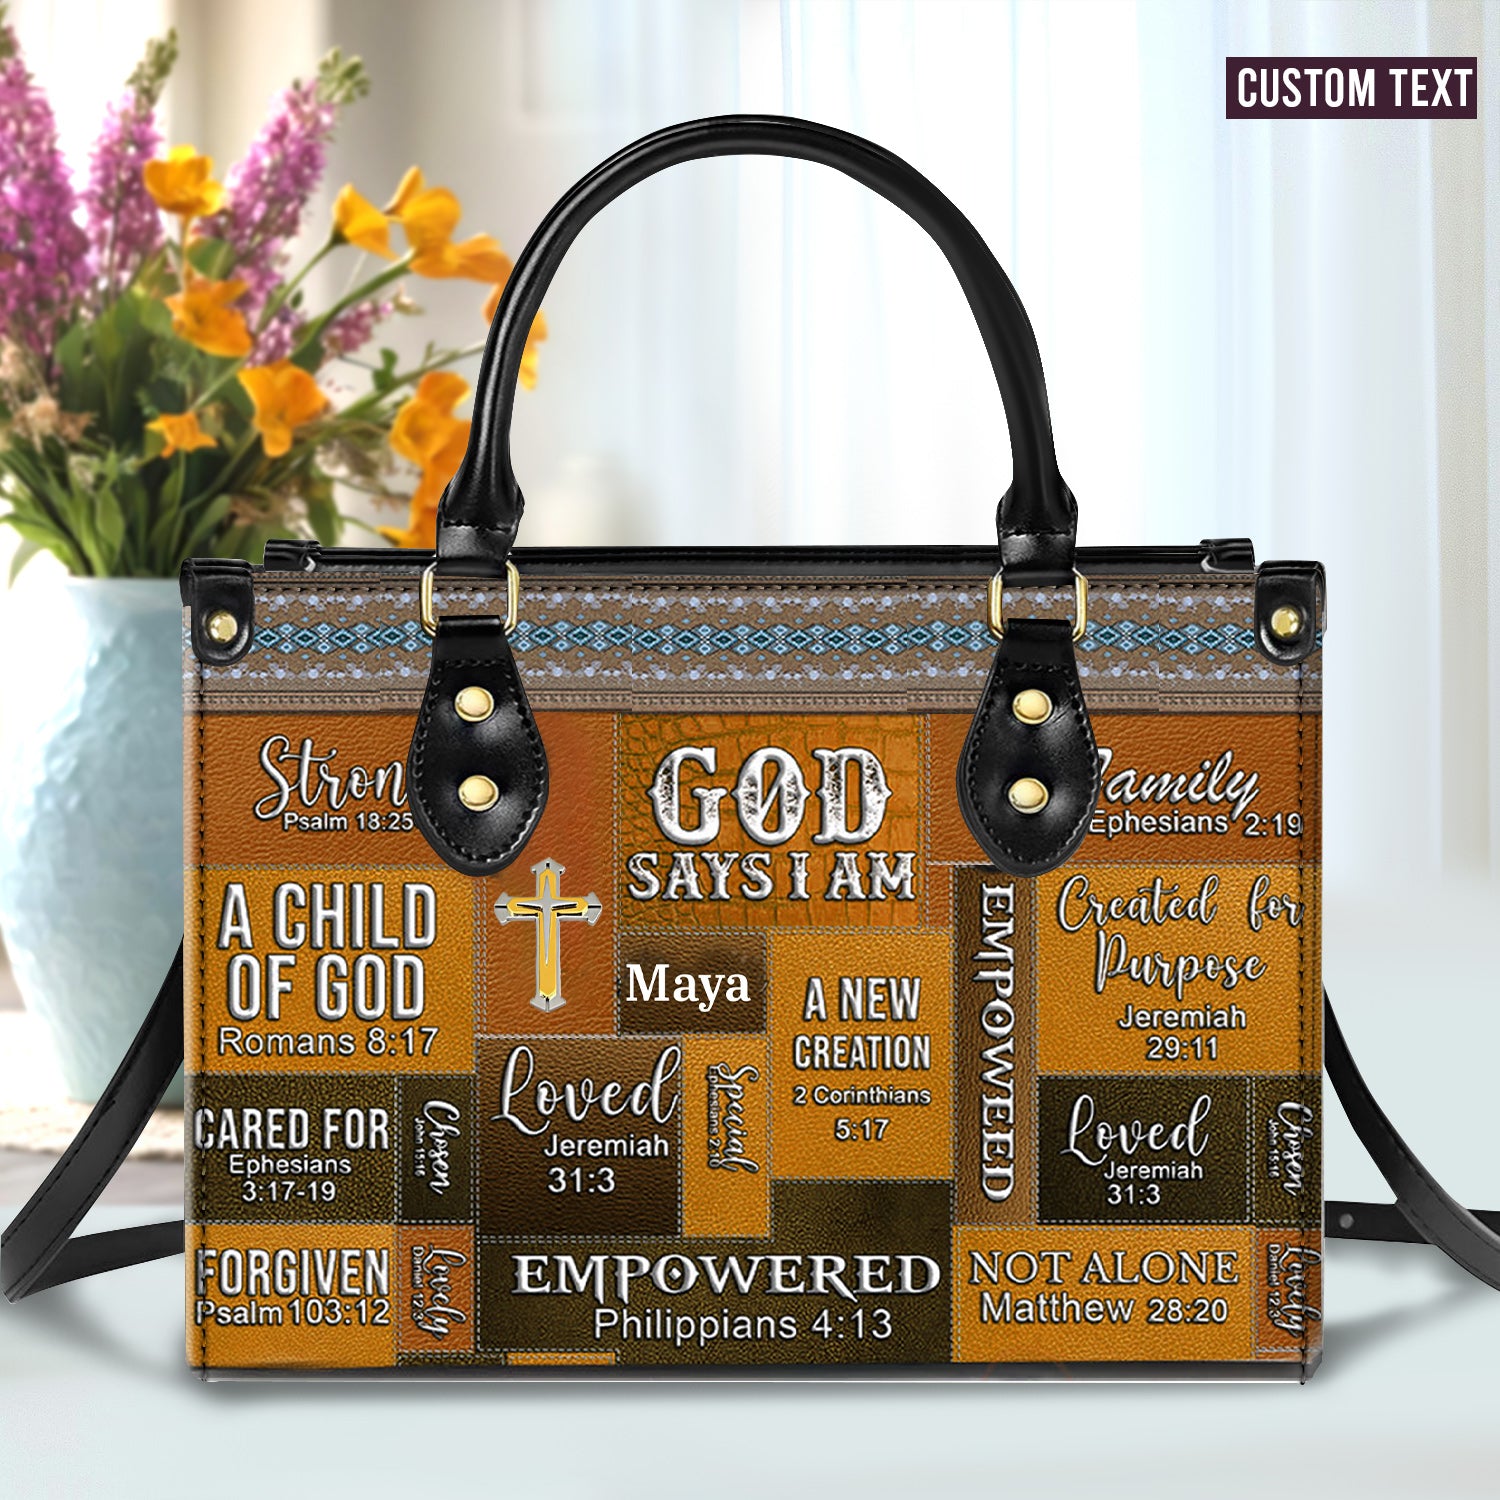 God Says I Am Brown Personalized Leather Handbag Bags, Gifts for Women